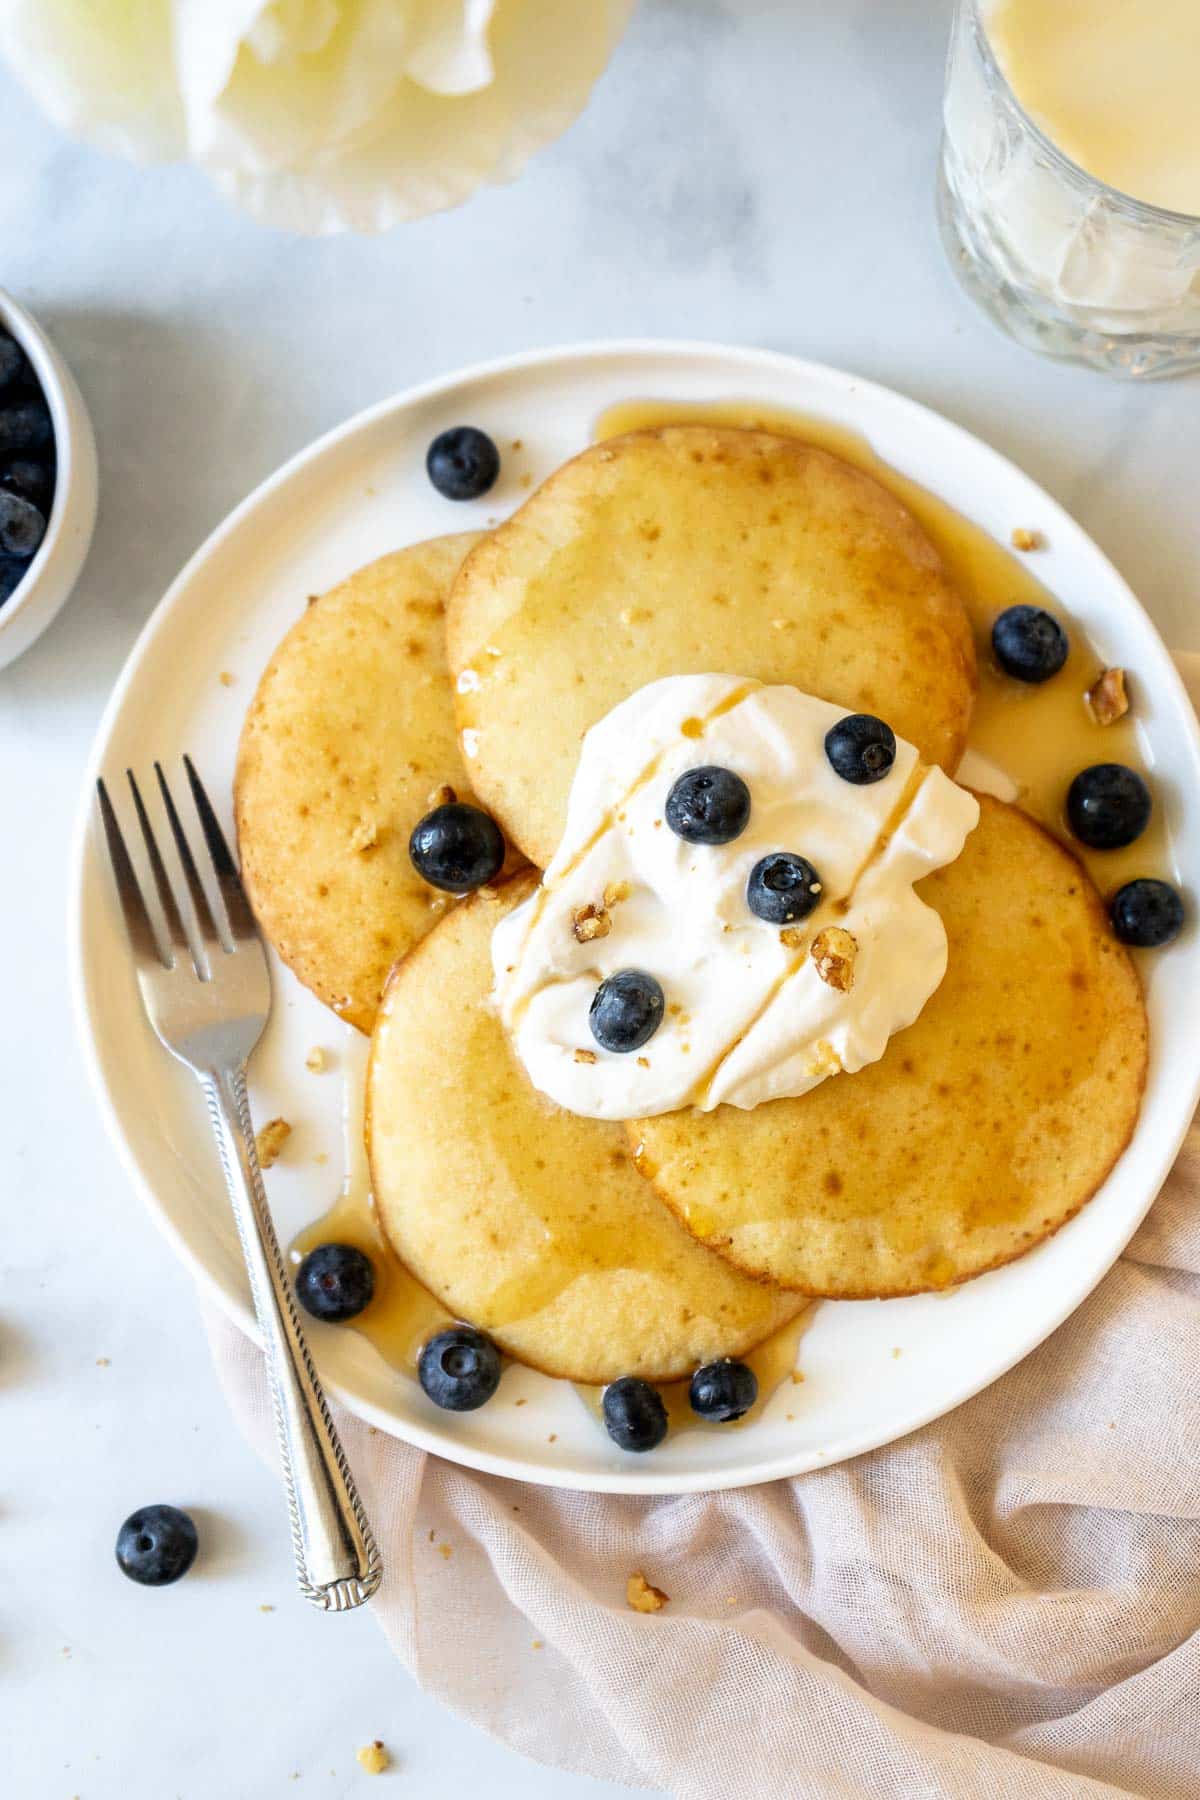 Four air fryer pancakes on a plate with whipped cream, blueberries and maple syrup.